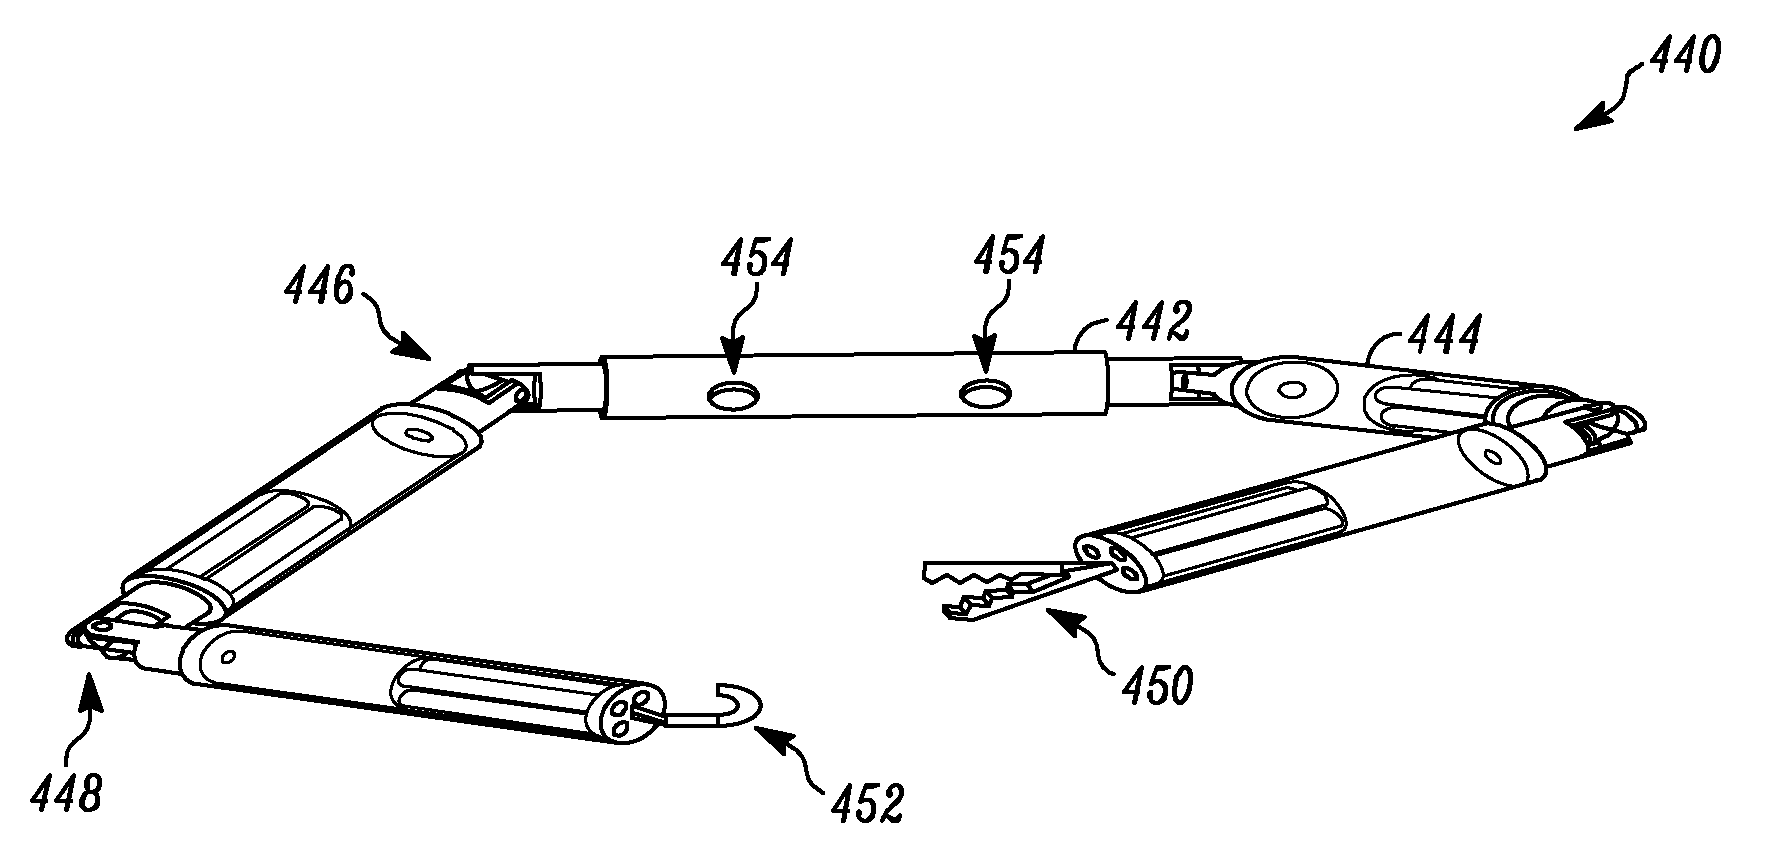 Magnetically coupleable robotic surgical devices and related methods